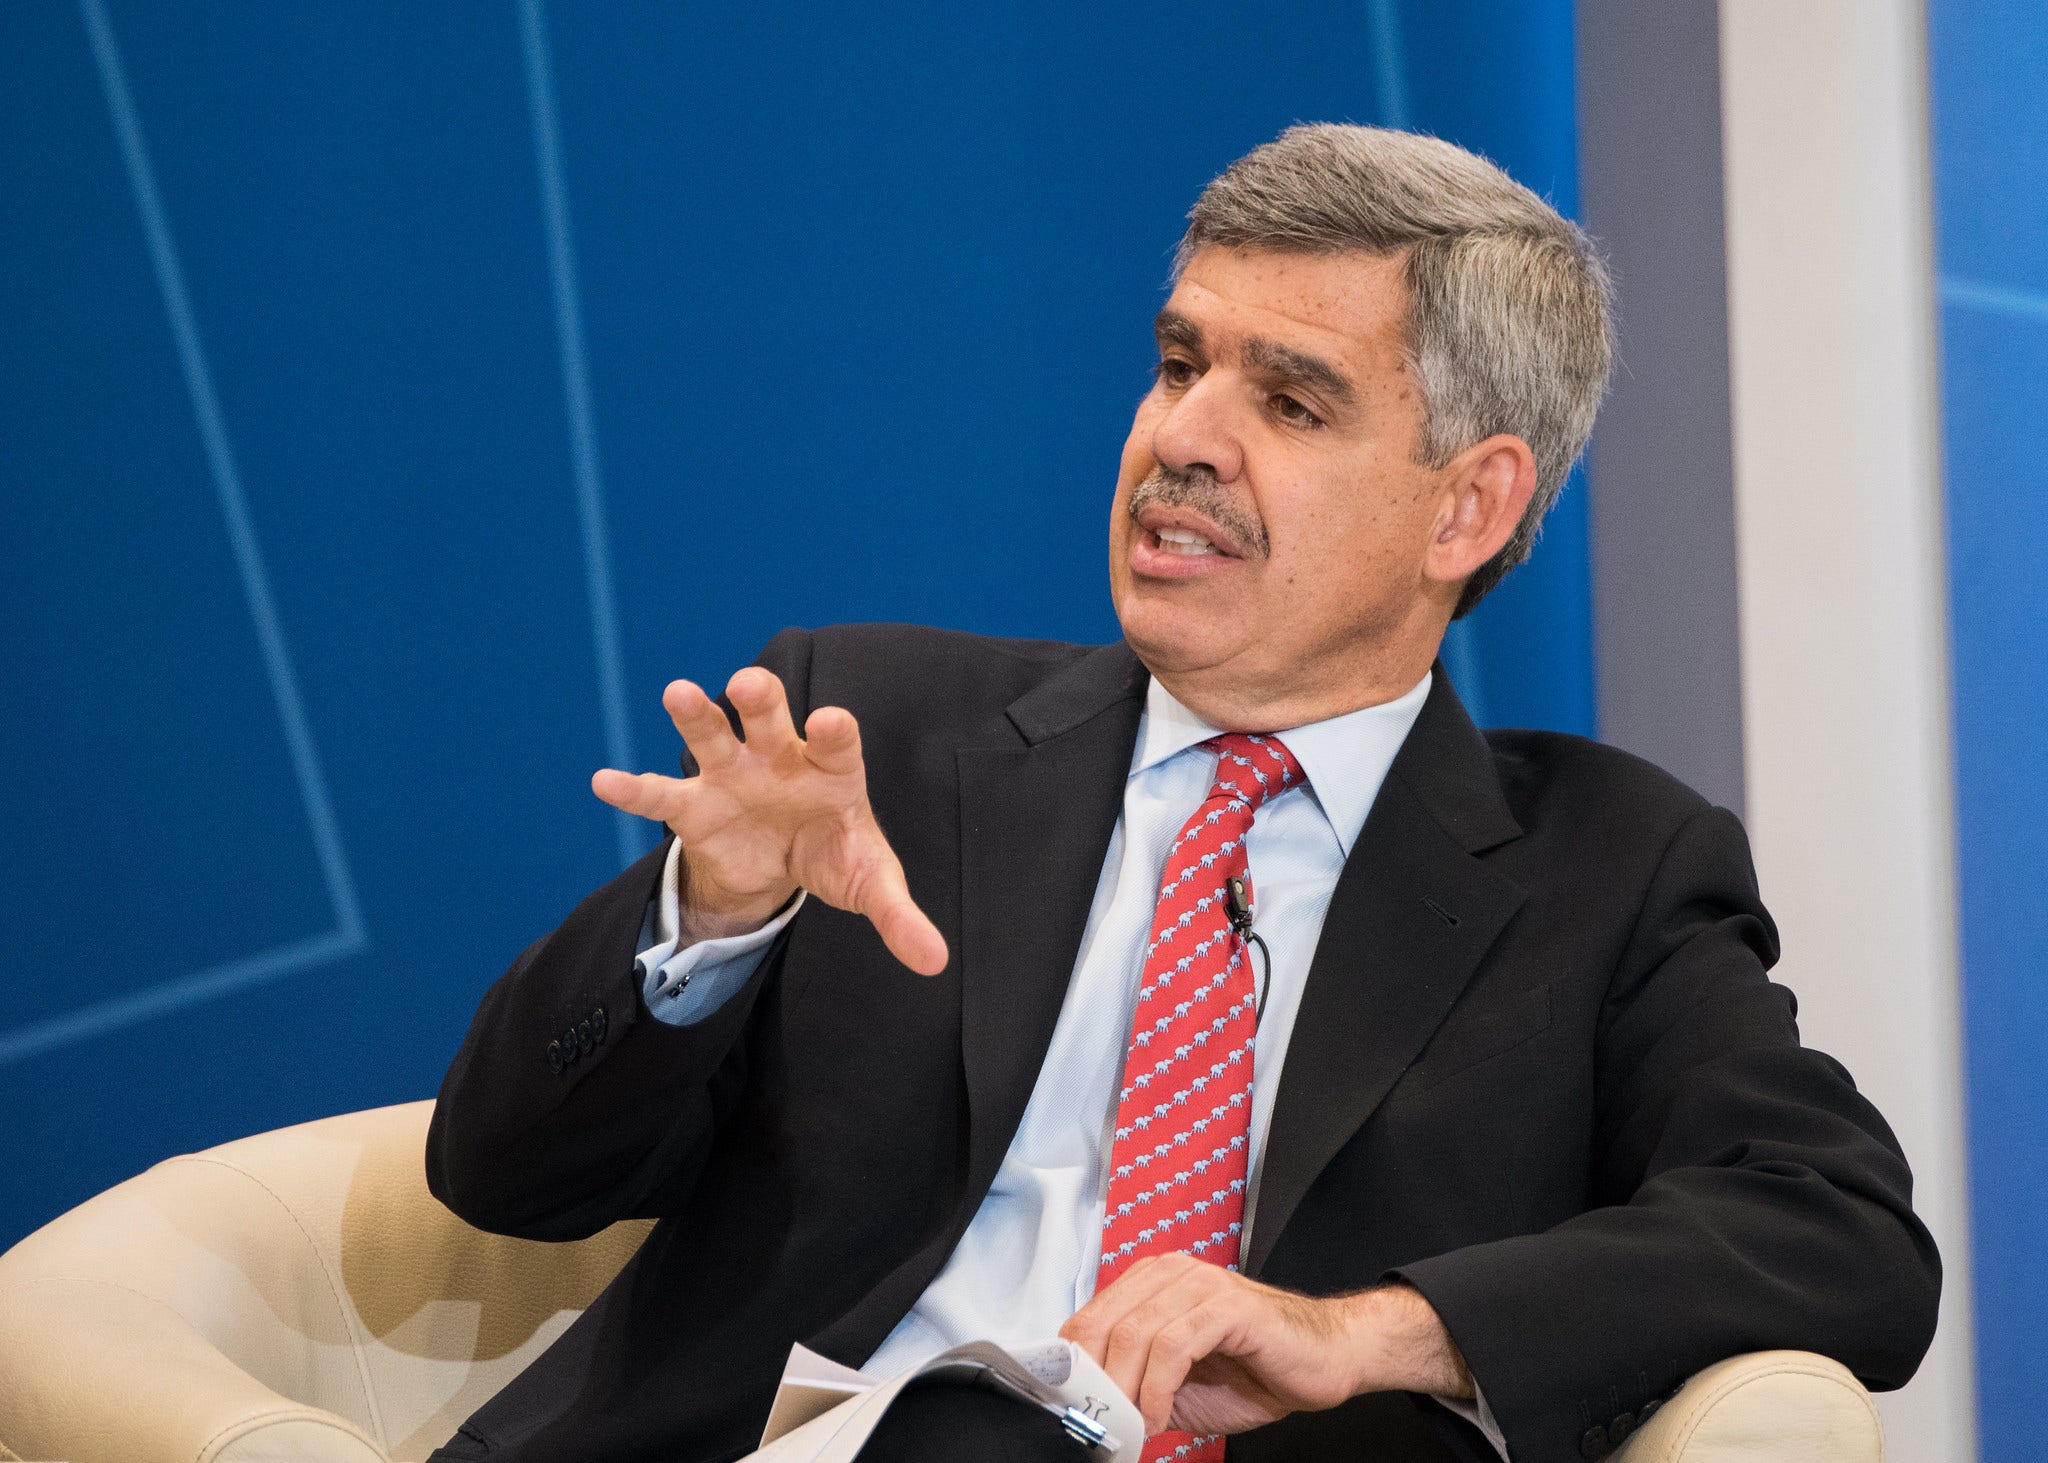 El-Erian Says Market Reaction To Powell's Remarks Shows Fed's Communication Challenge: 'The More The Chair Tilts His Remarks Dovish...'